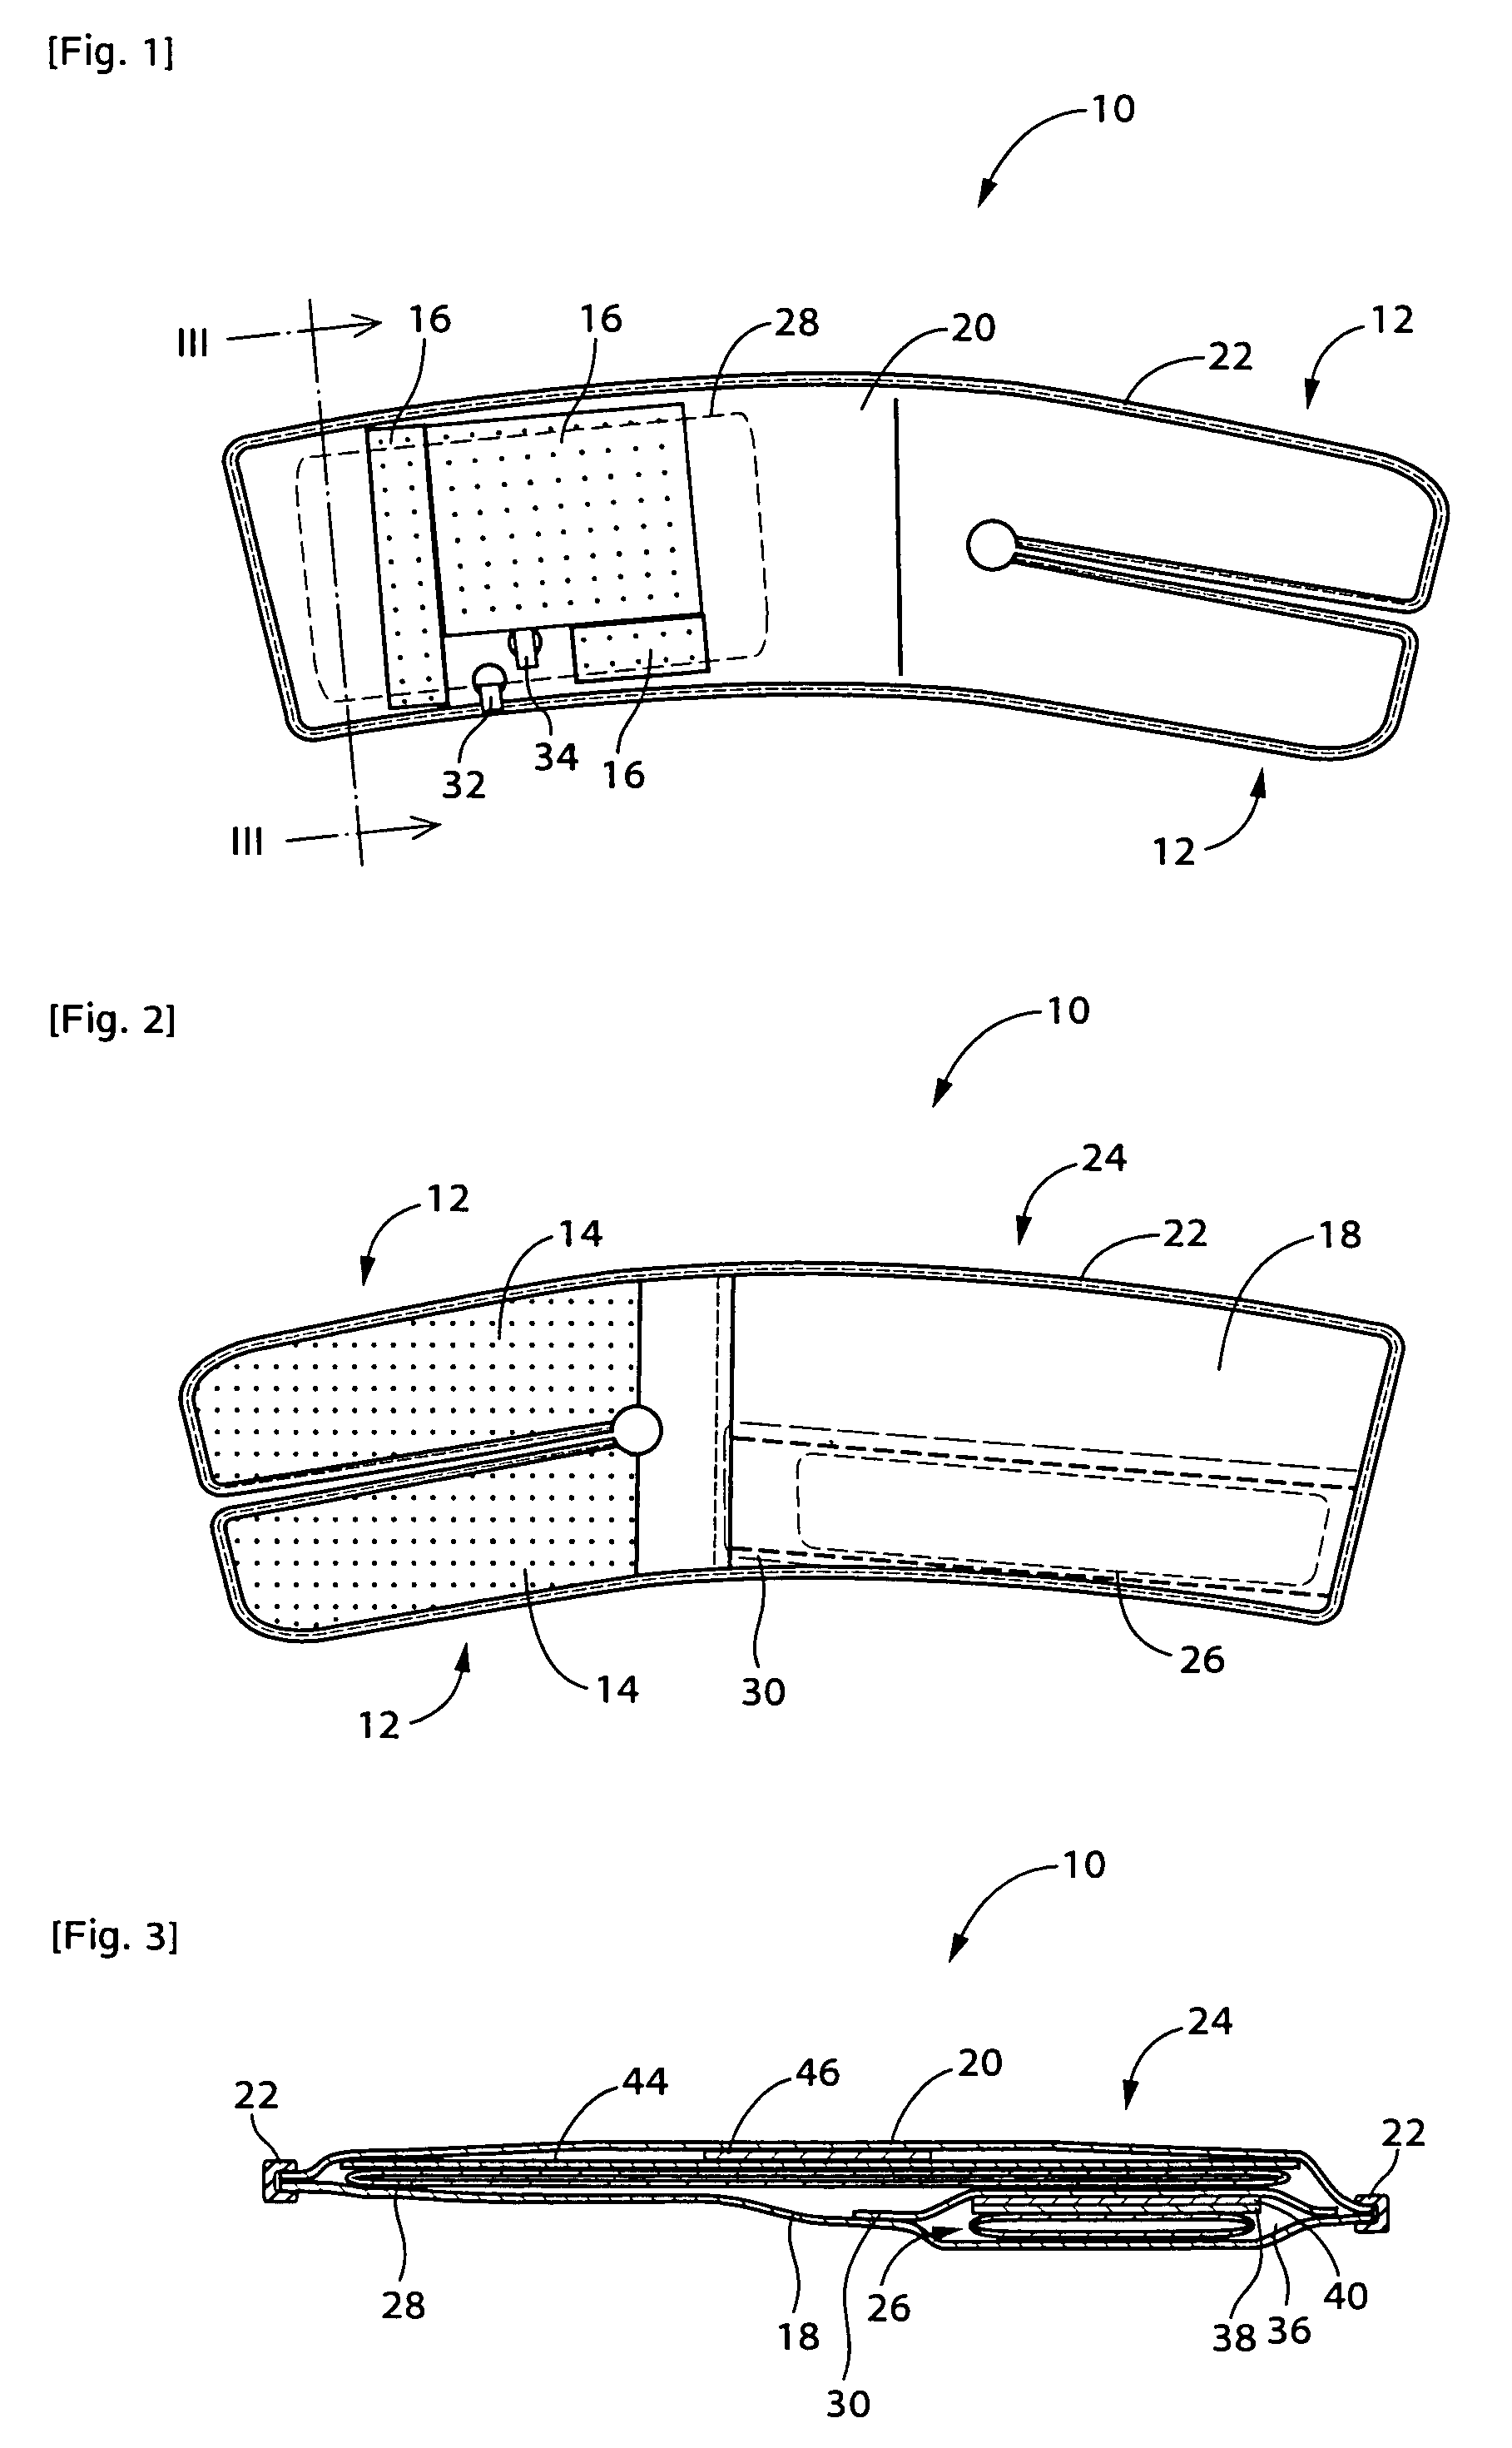 Inflatable cuff for blood pressure measurement